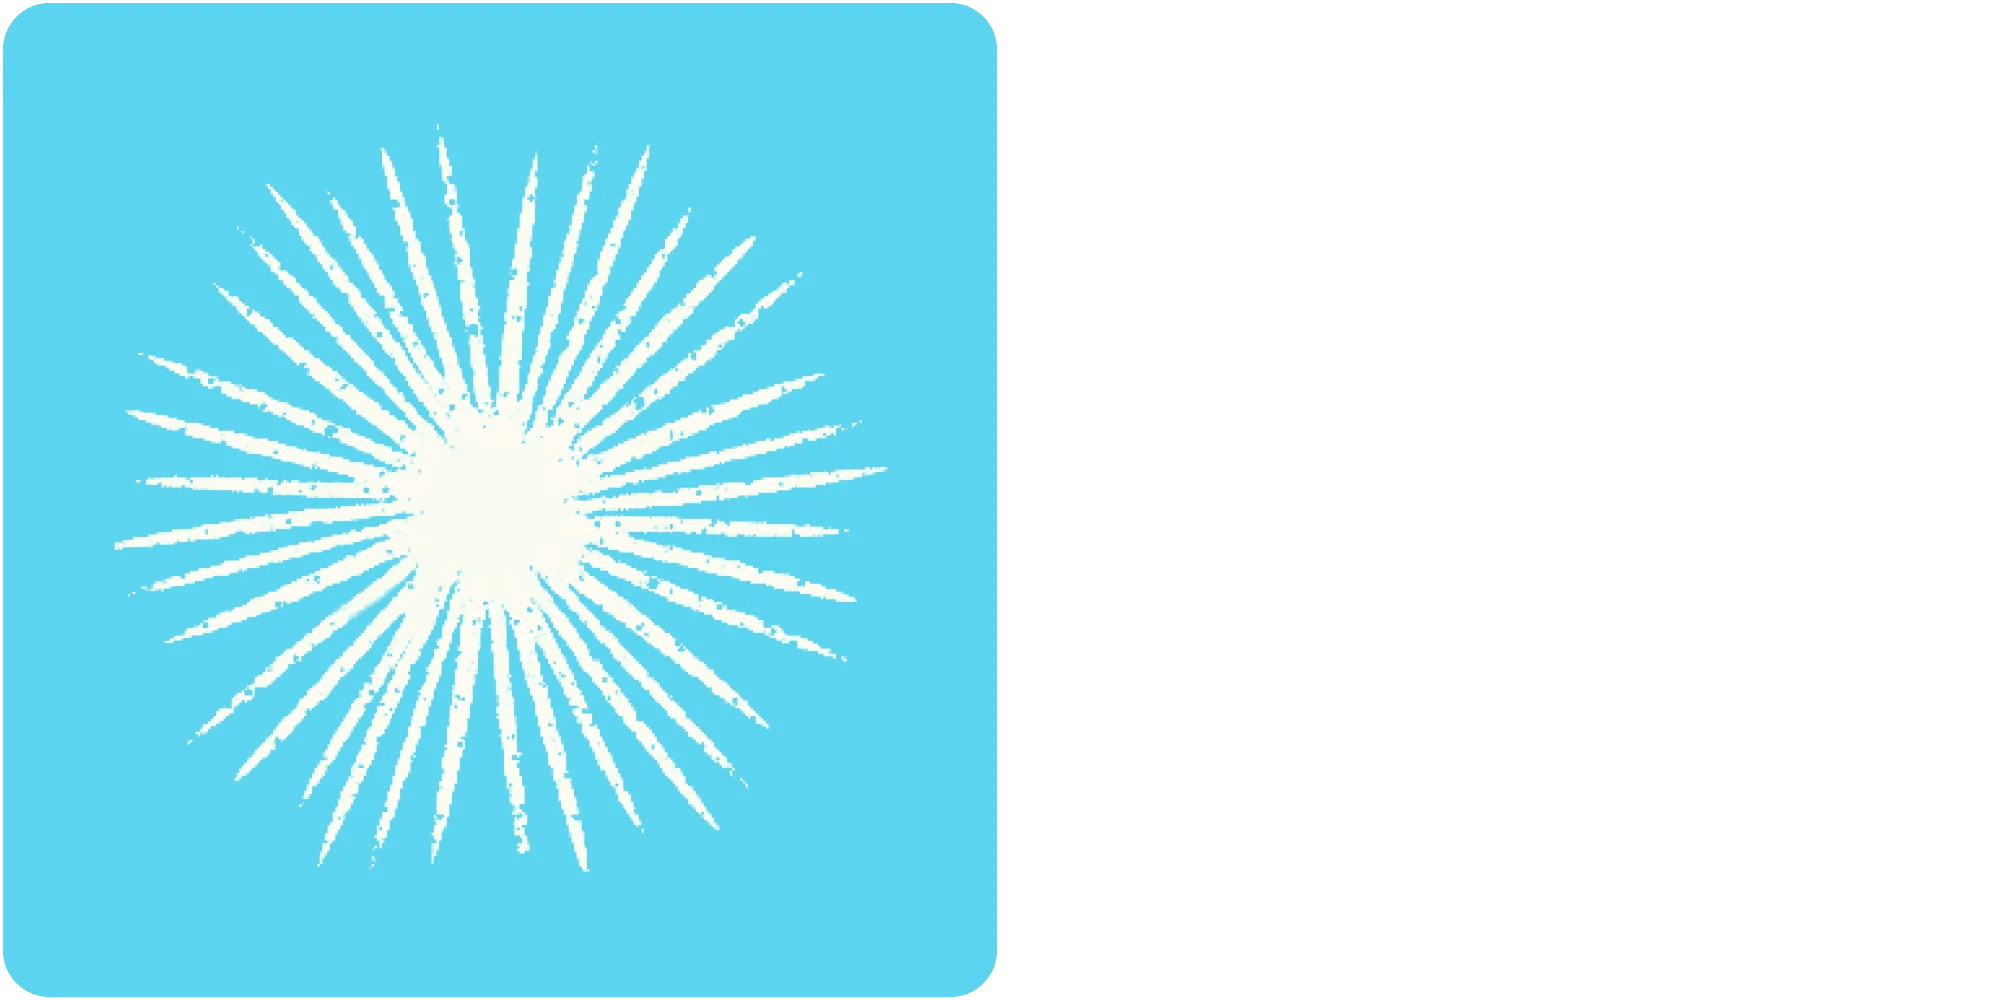 The image features a white, radiating star-like design with numerous spiky rays extending outward from the center, set against a bright blue square background.